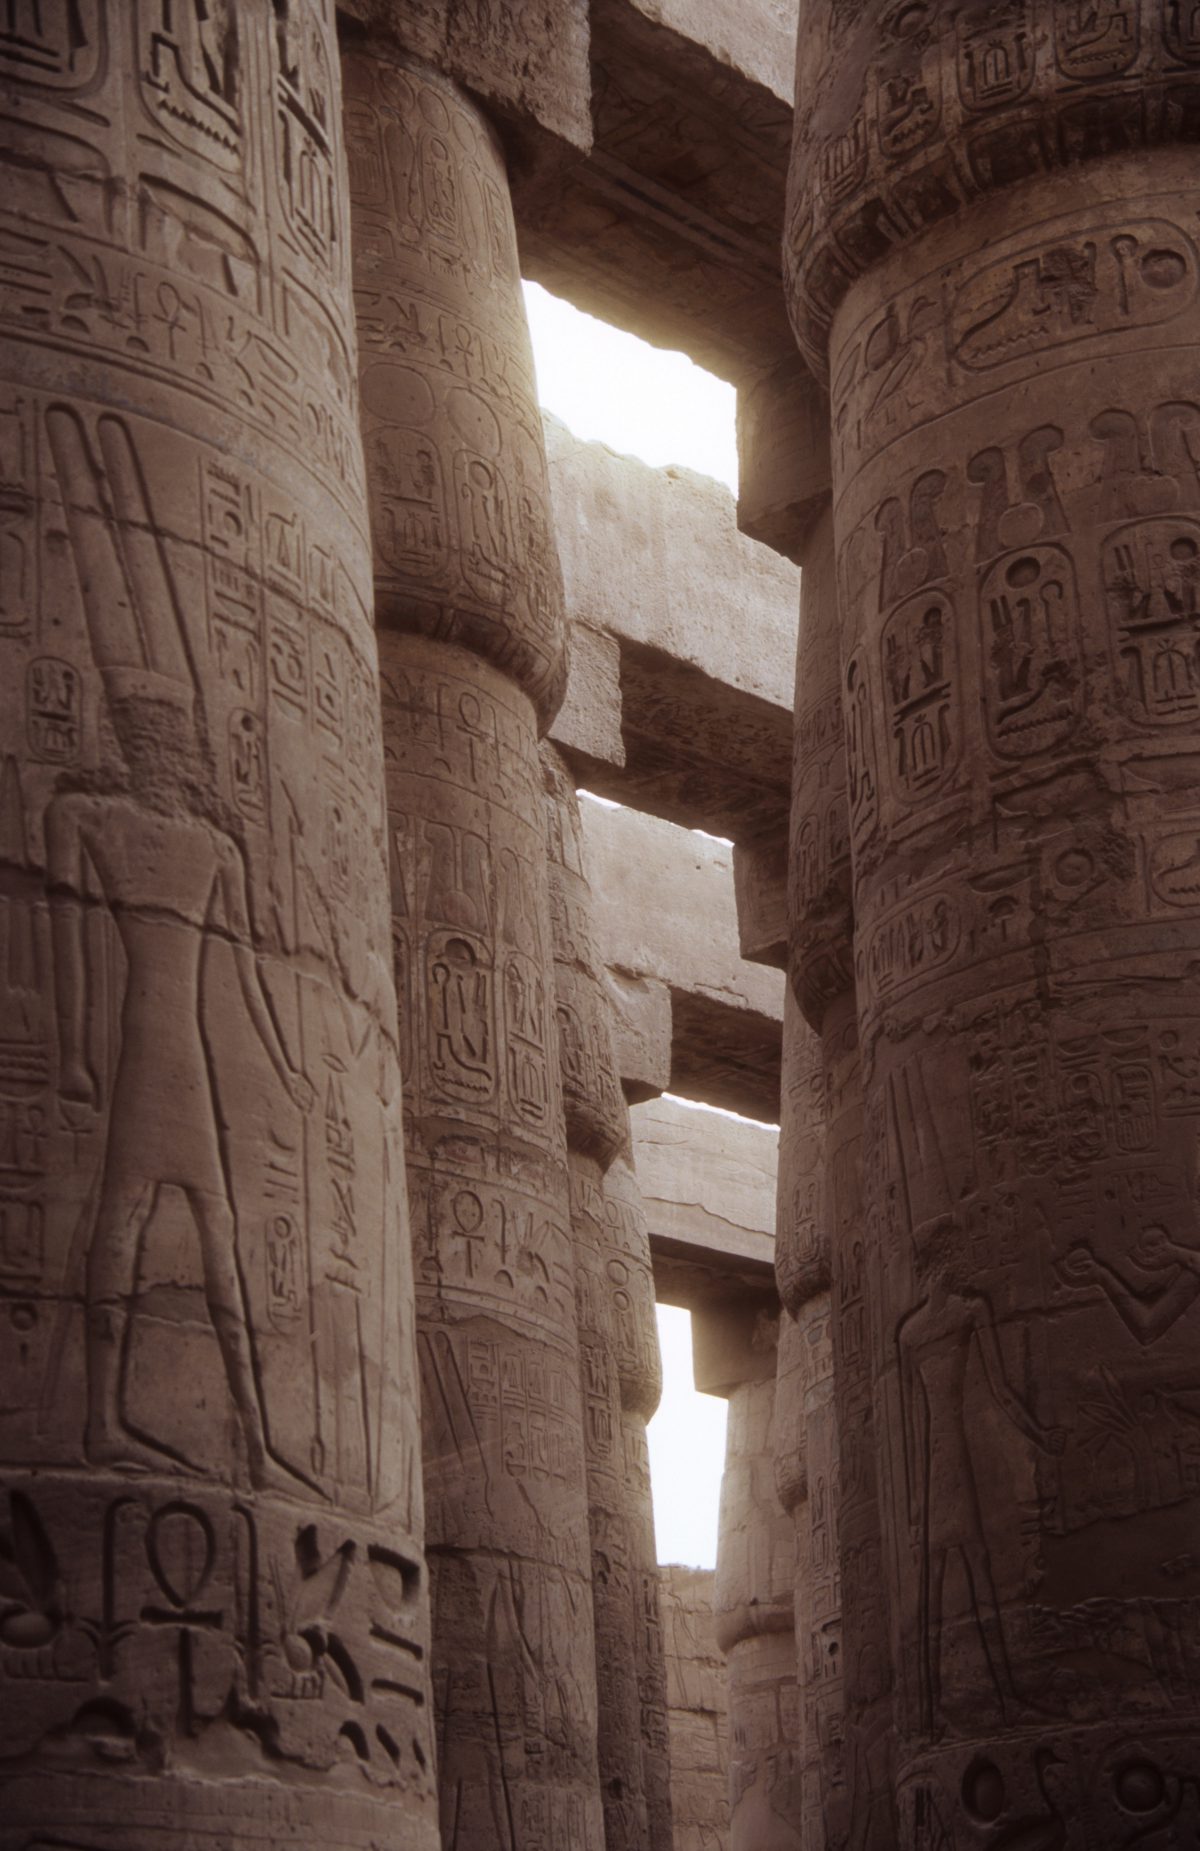 Luxor Temple - A large Egyptian Temple complex. The biggest hall of the ancient world., landmark